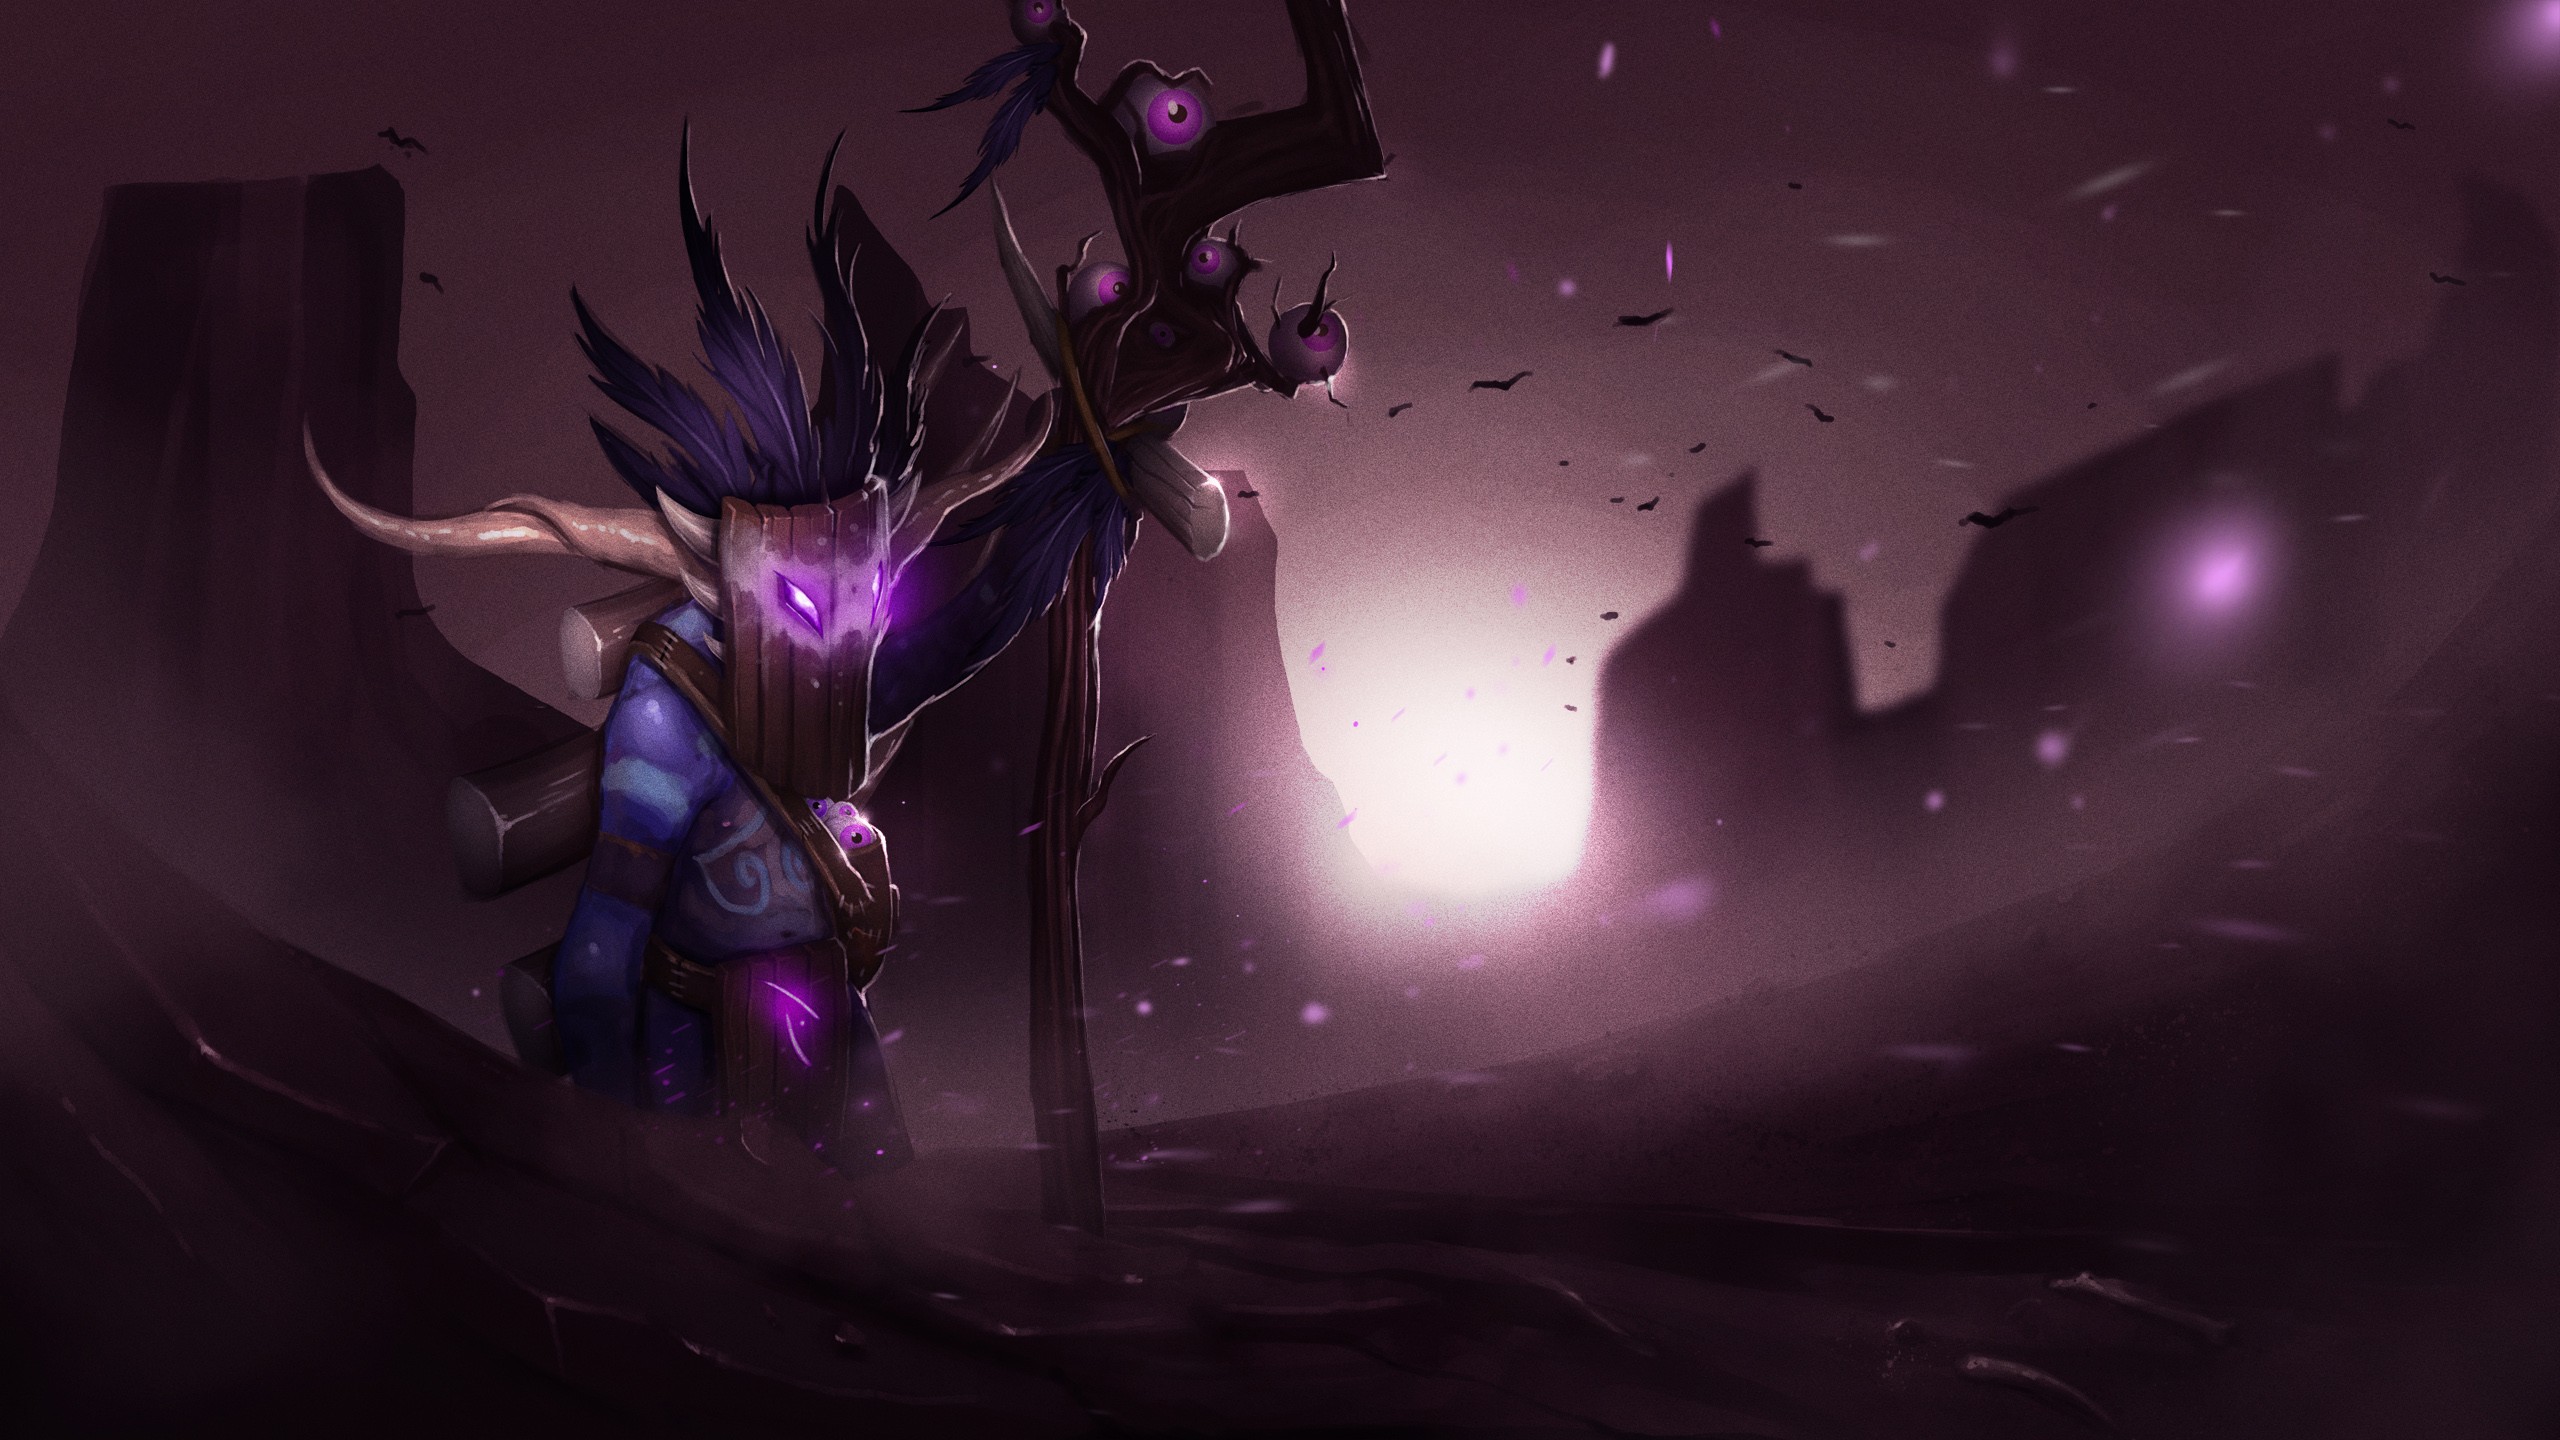 Dota 2 Dota Defense Of The Ancients Valve Valve Corporation Witch Doctor Character 2560x1440